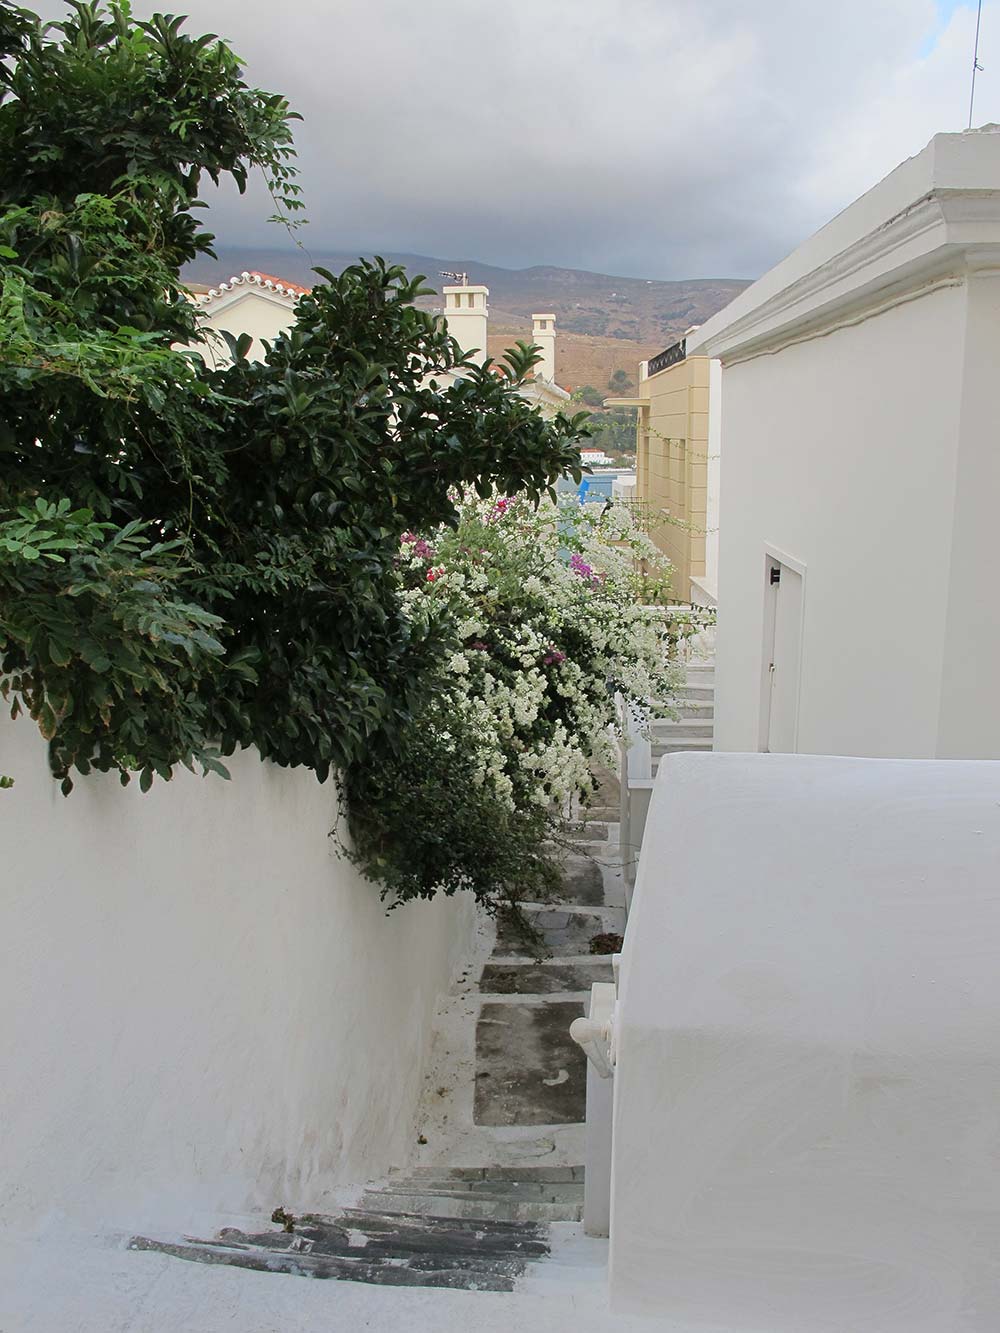 Image of Chora, Andros